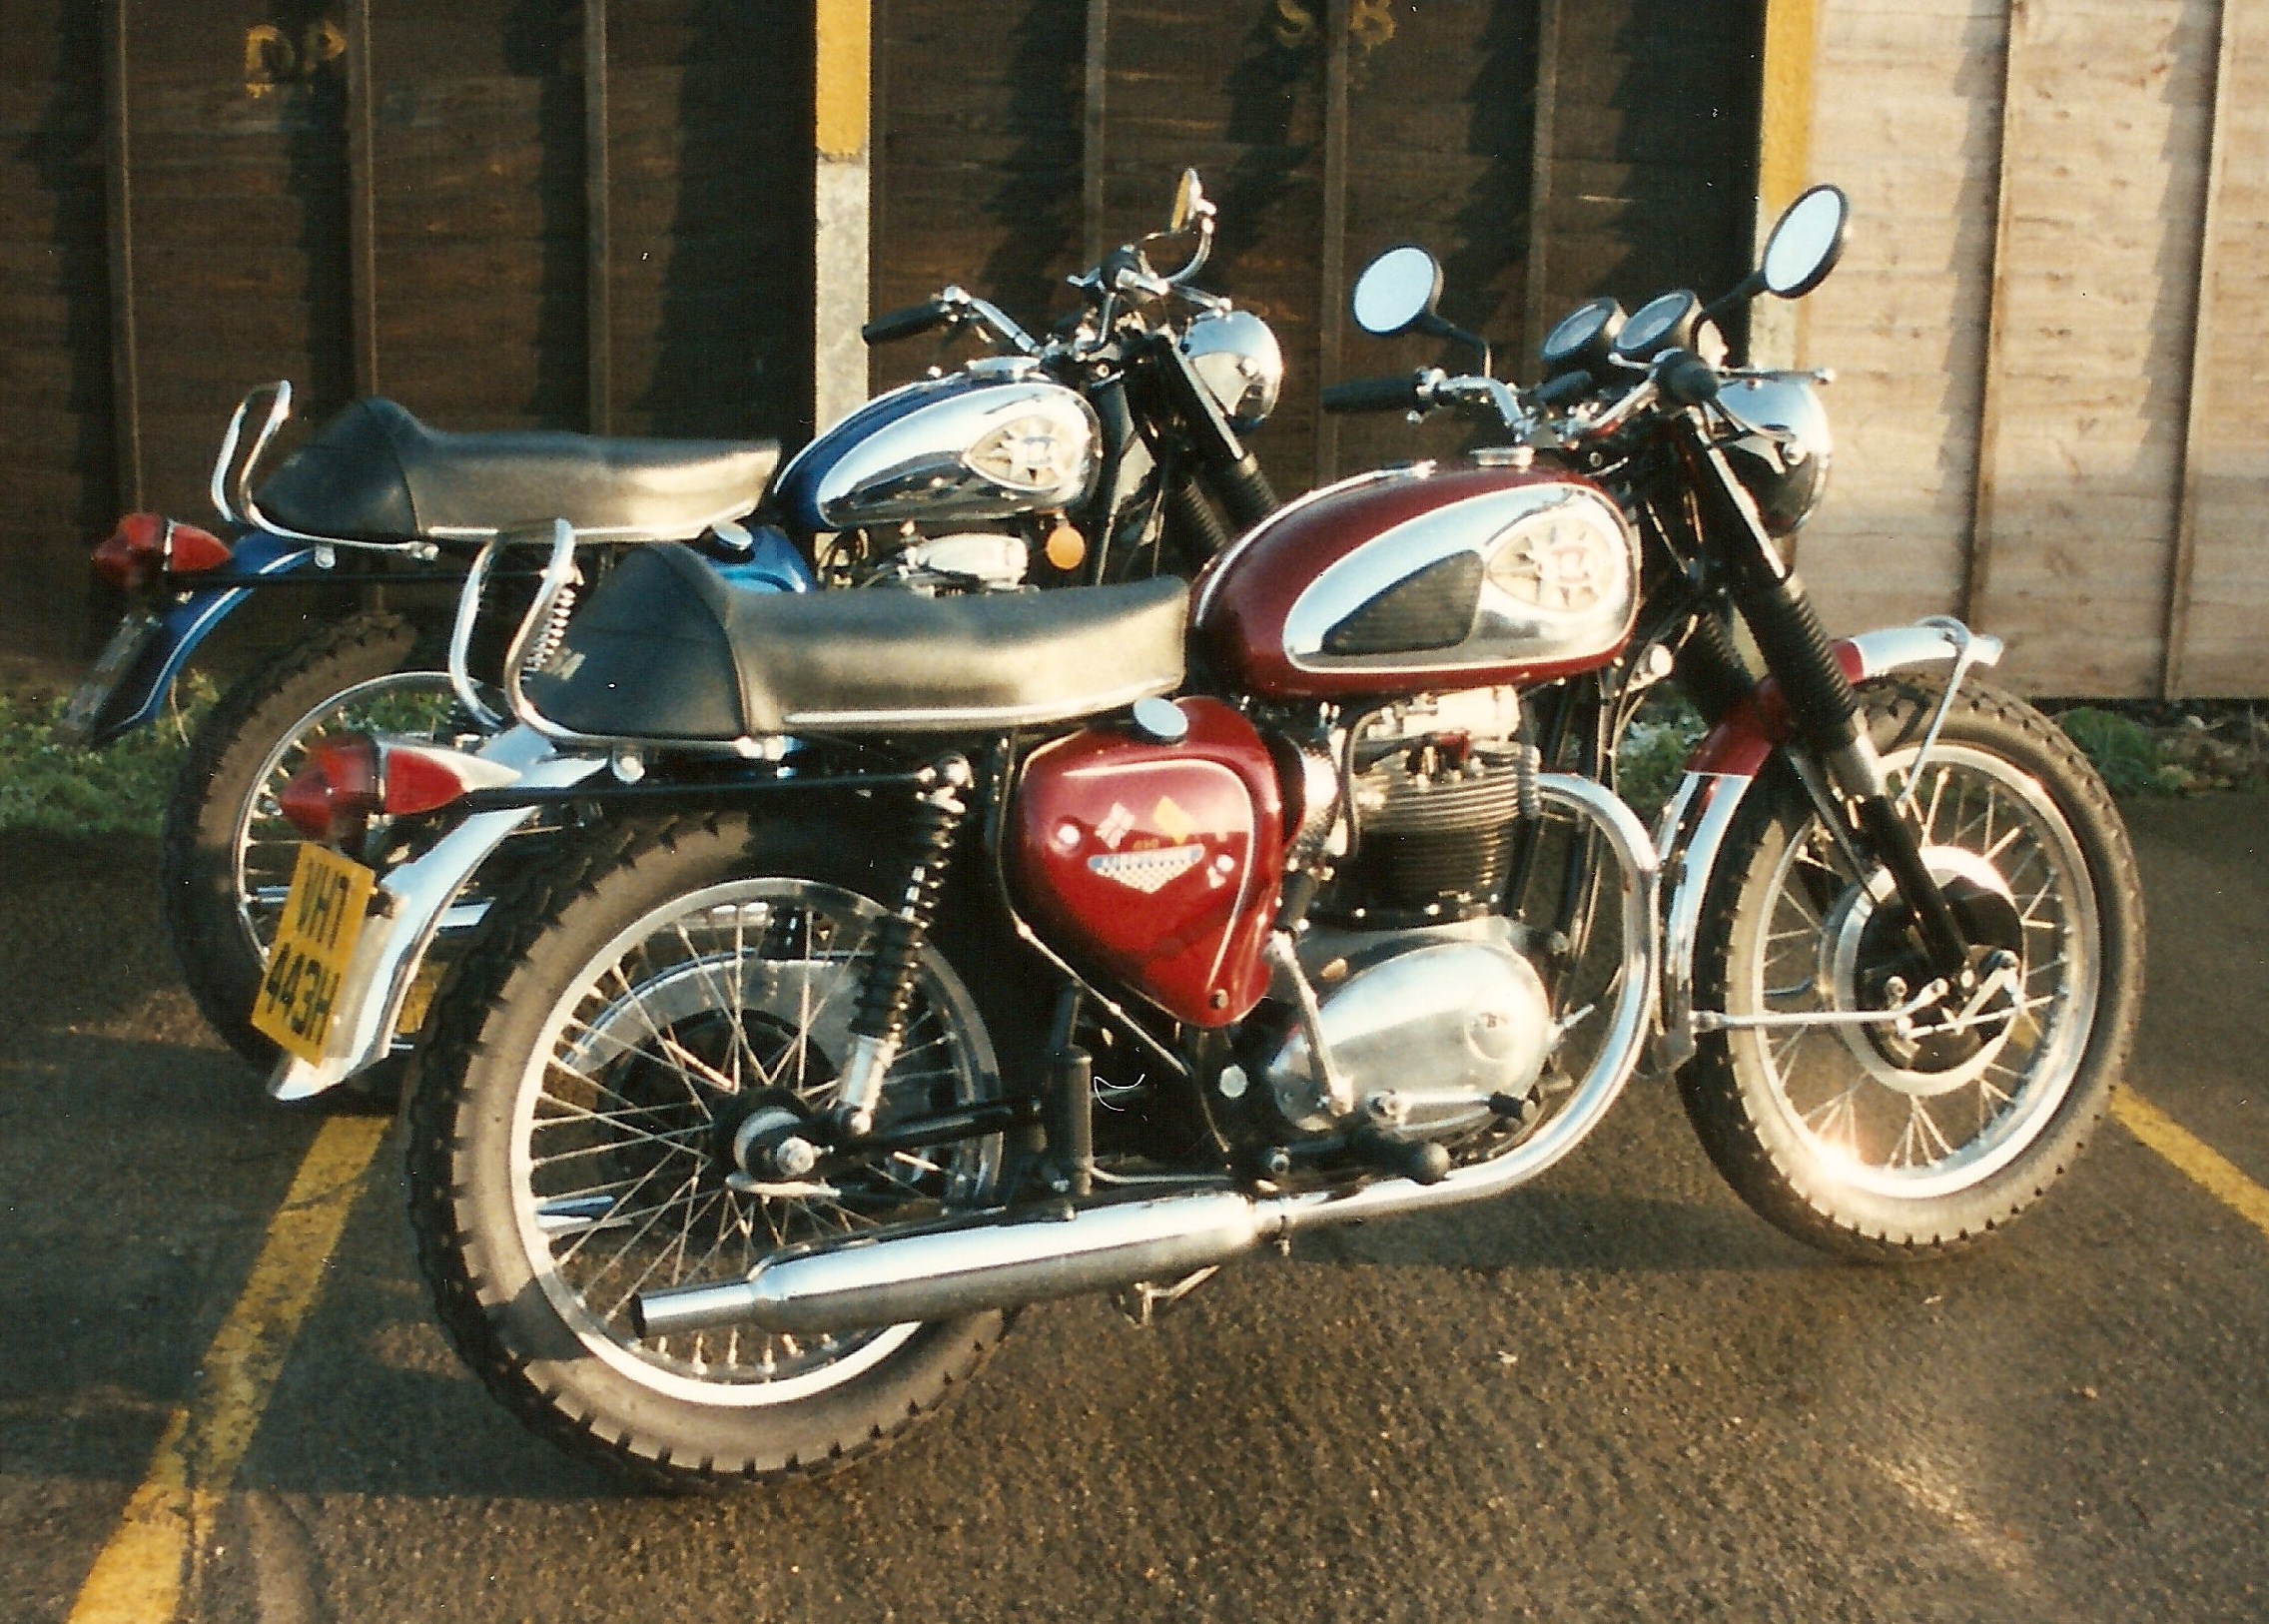 A 1970 Lightning I restored and owned for a while together with a 500cc Royal Star of the same vintage